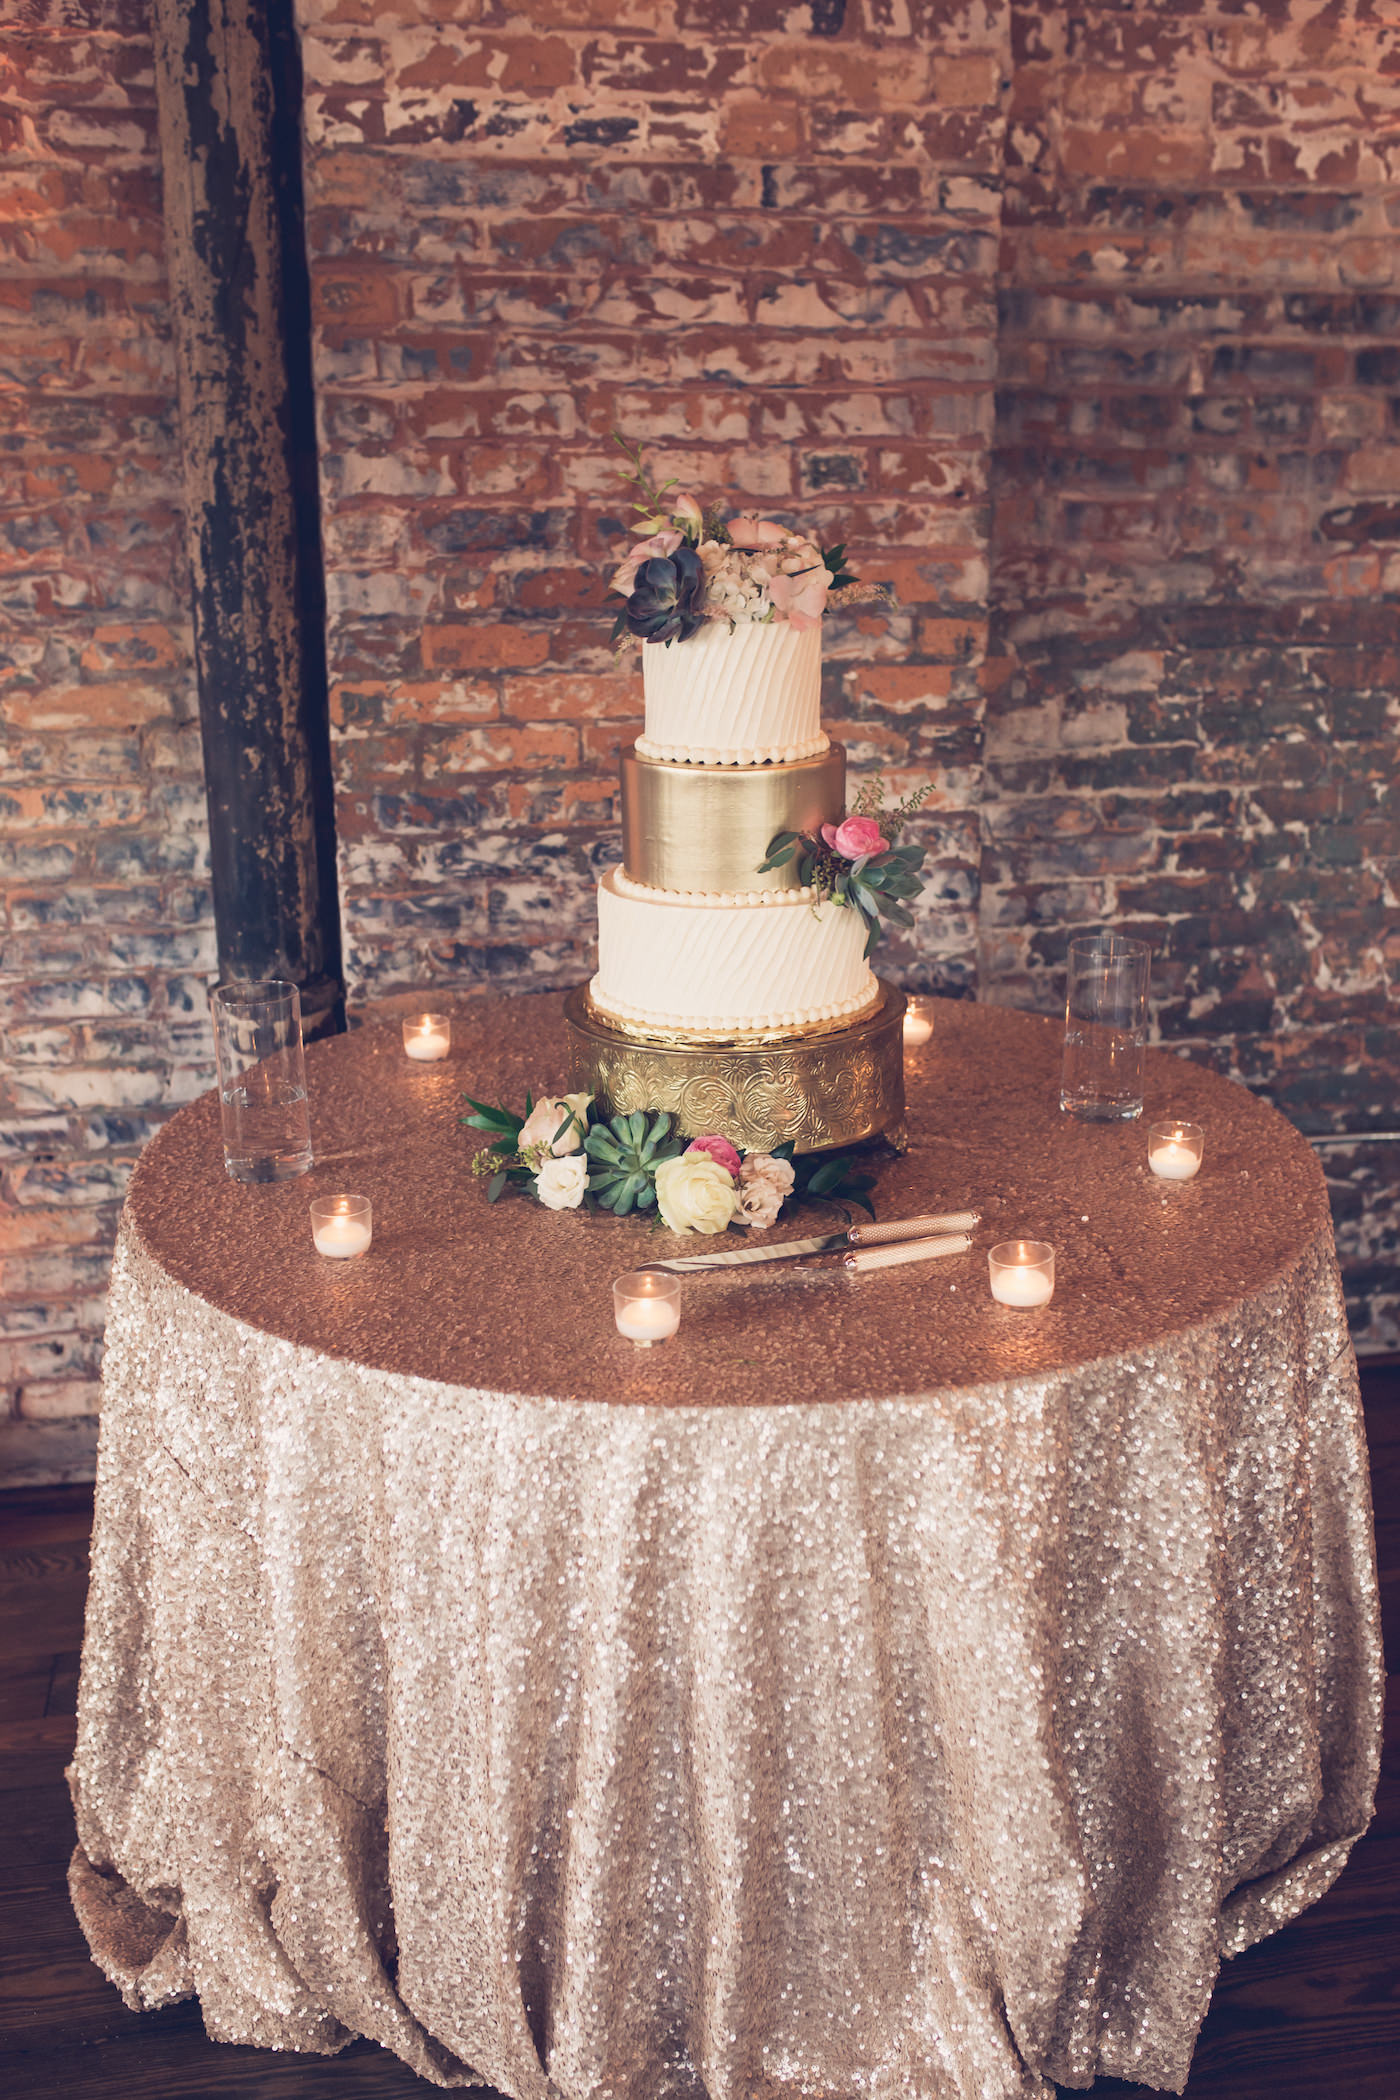 Wedding Cake Table with Champagne Rose Gold Sequin Linen and Votive Candles | Three Tier Gold and Ivory Wedding Cake with Fresh Flowers on Round Ornate Gold Cake Stand | Tampa Wedding Bakery The Artistic Whisk